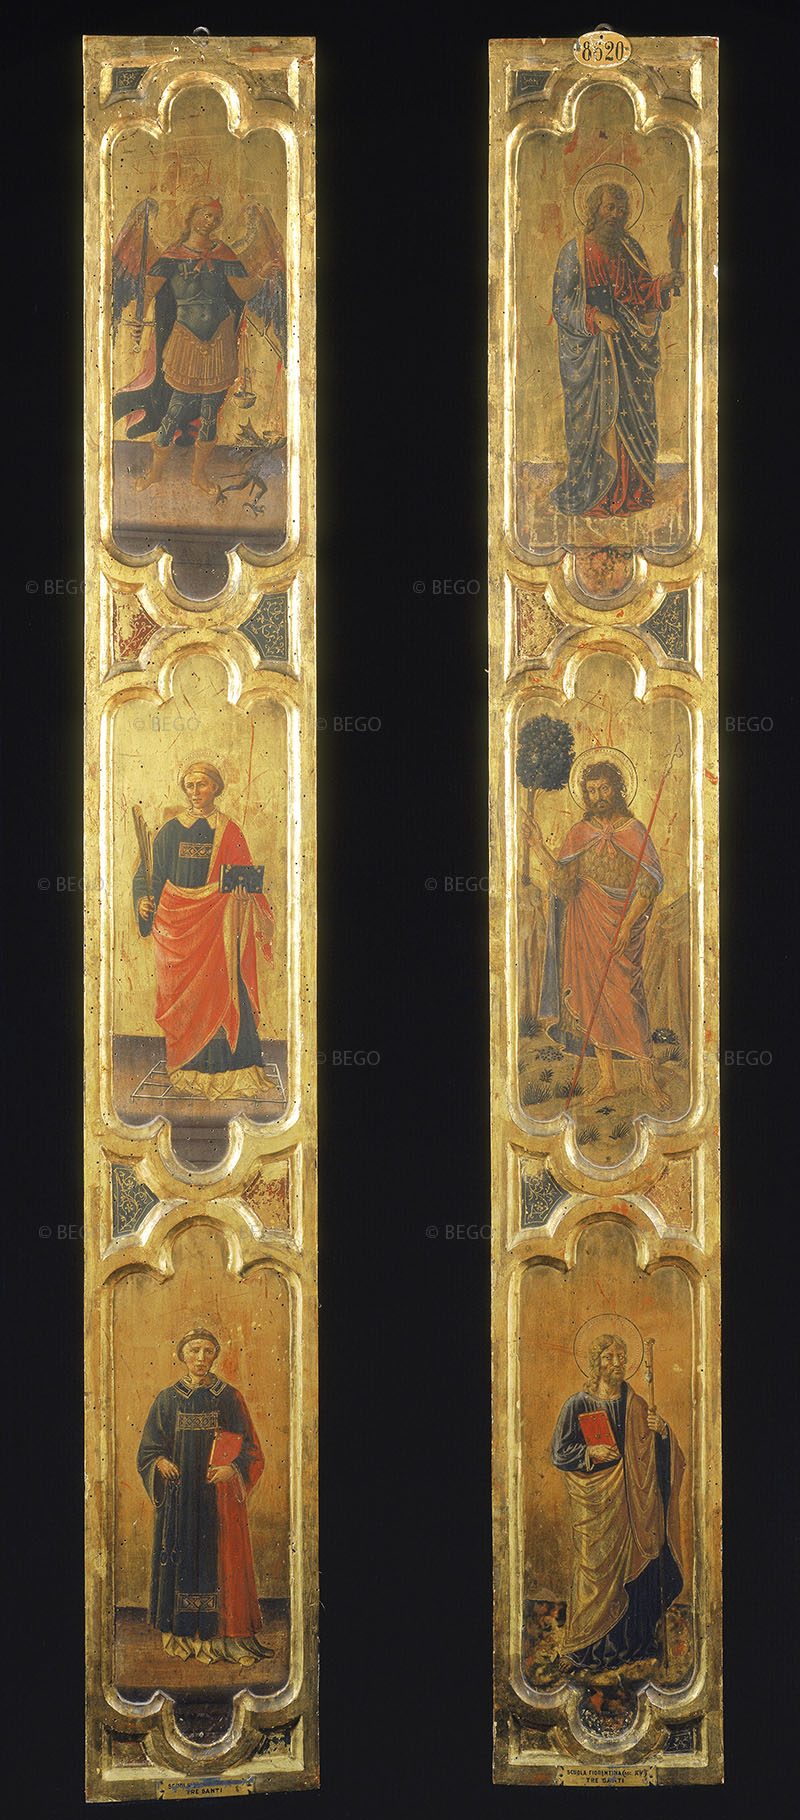 Pillars depicting Saints, Accademia Gallery, Florence.